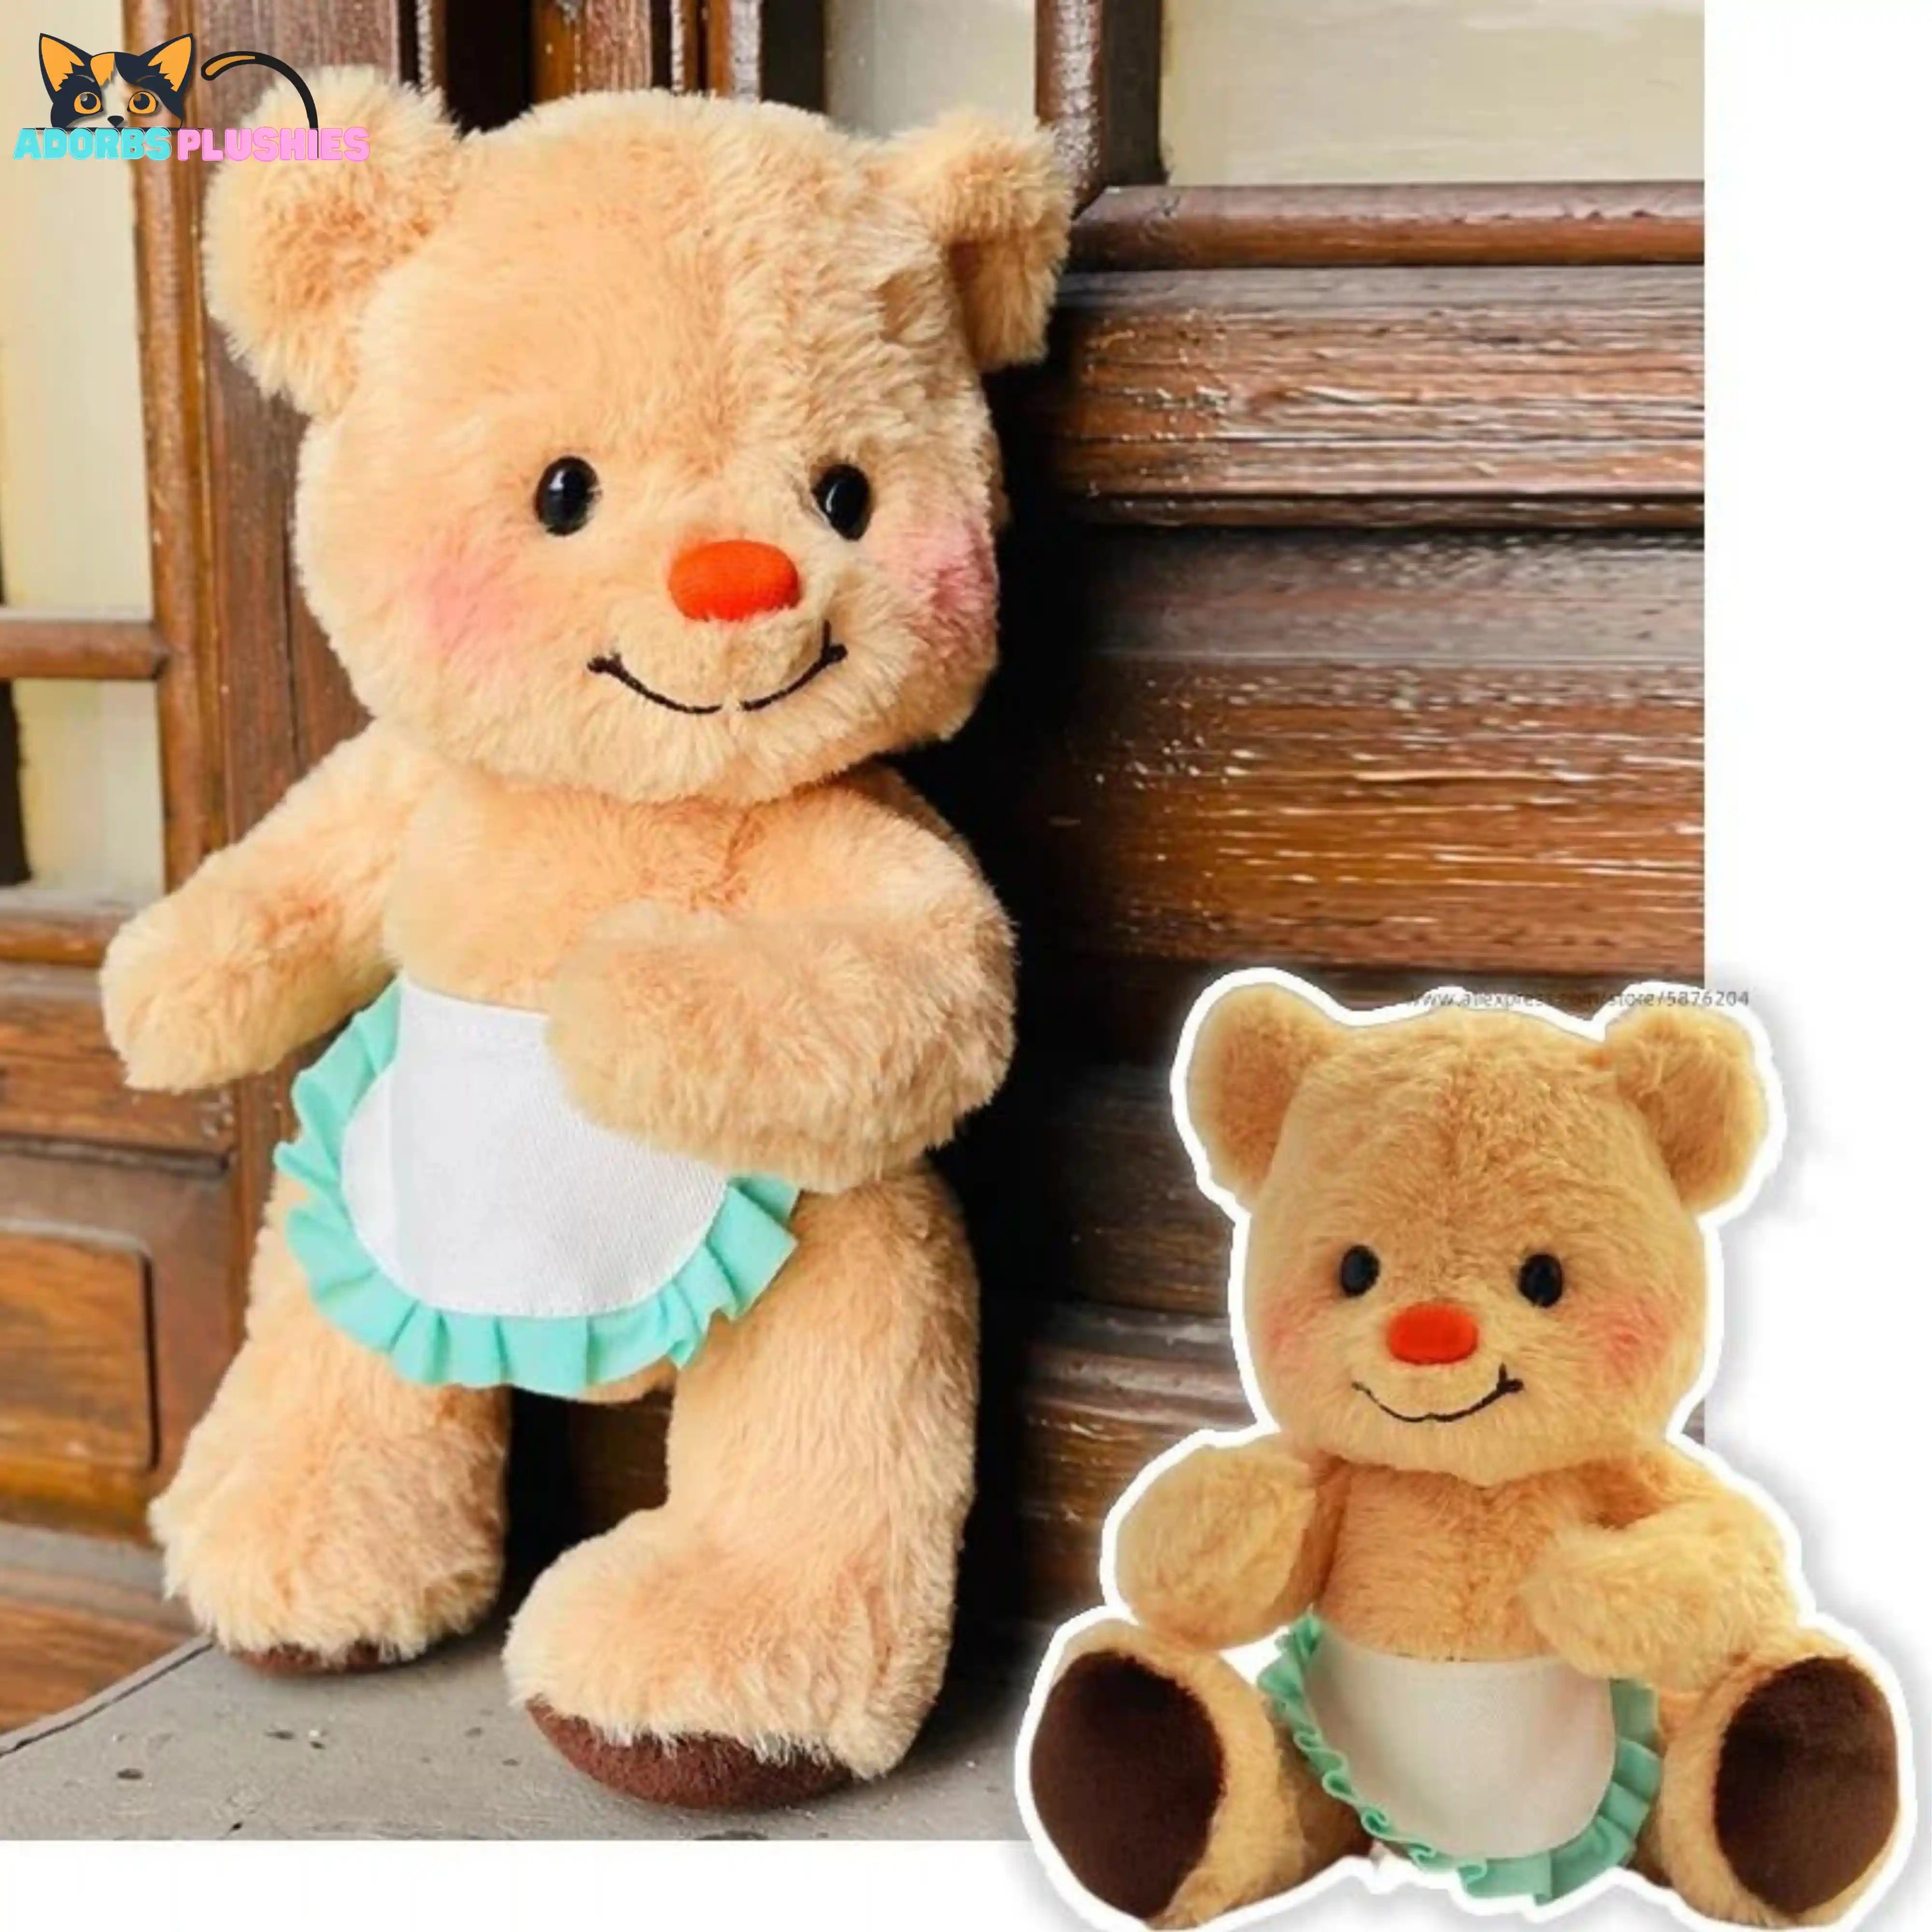 Butter Bear Plush Toy - Jointed Brown Bear for Kids